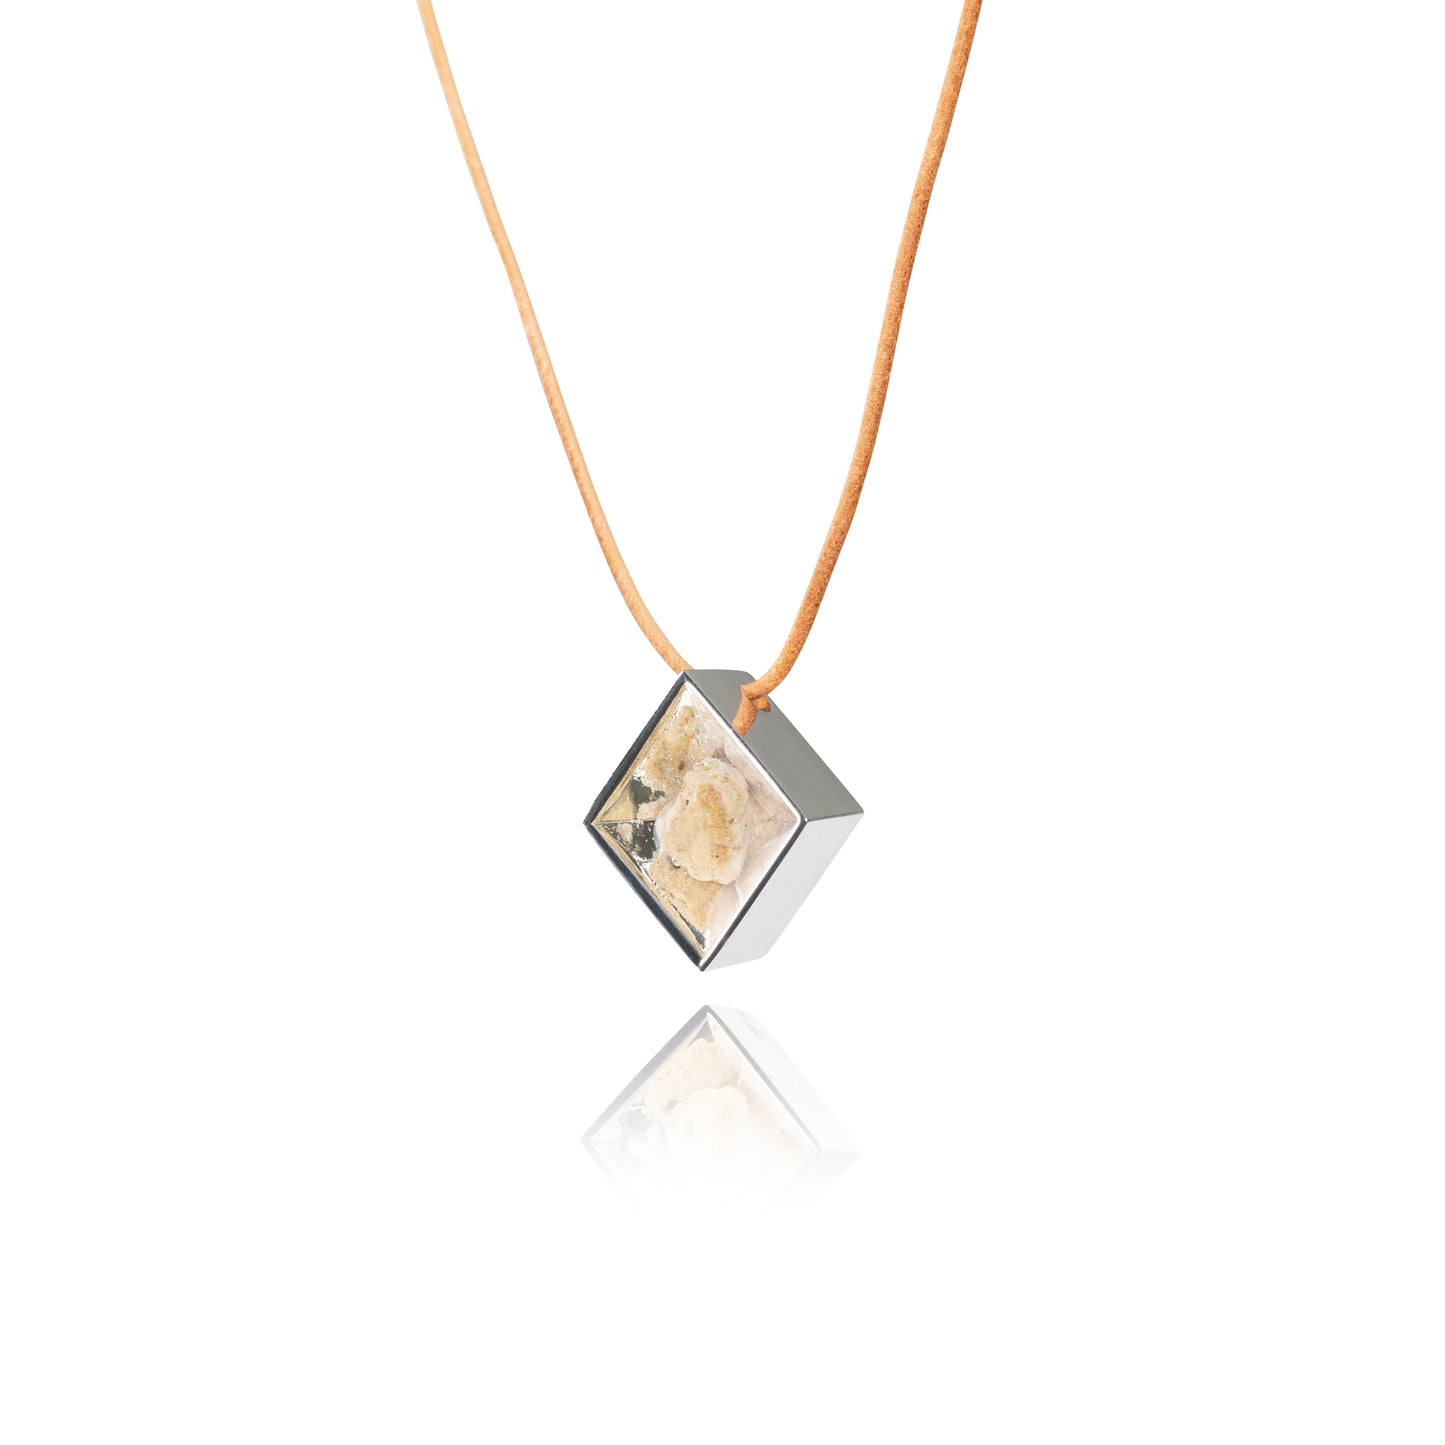 A side view of a small natural tan stone sitting in the middle of a diamond shaped metal pendant in a silver color. The pendant is hanging on a tan leather necklace.